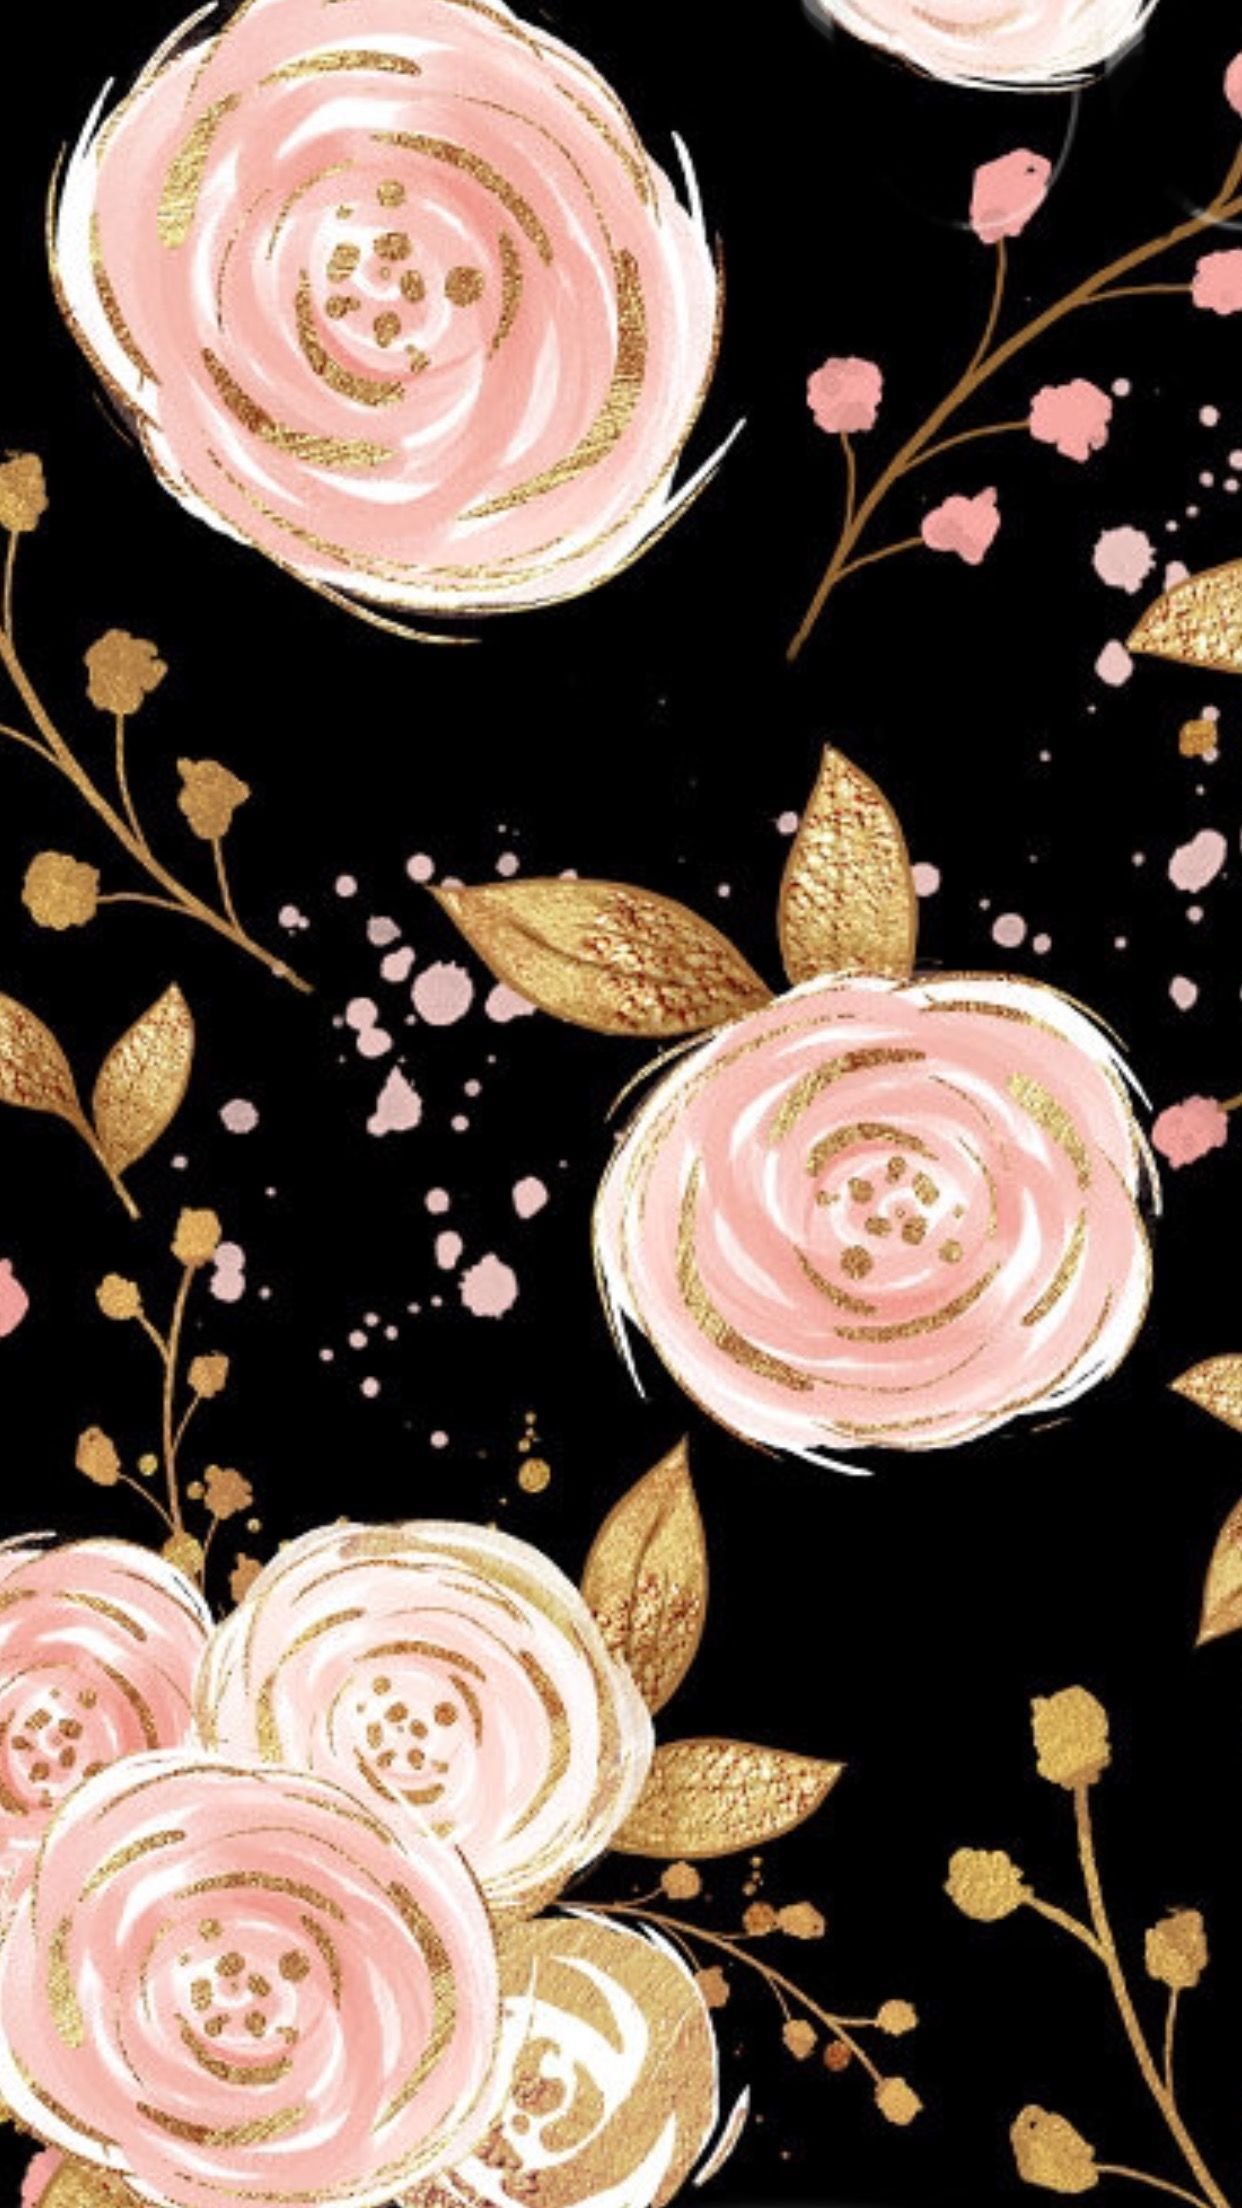 Avikalp Exclusive AWZ0146 Luxury and Elegant 3D New Flowers Rose Gold  Wallpaper Mural Tv Background Painting HD 3D Wallpaper[3 ft x 2 ft] /  [91.44 cm x 60.96 cm] : Amazon.in: Home Improvement